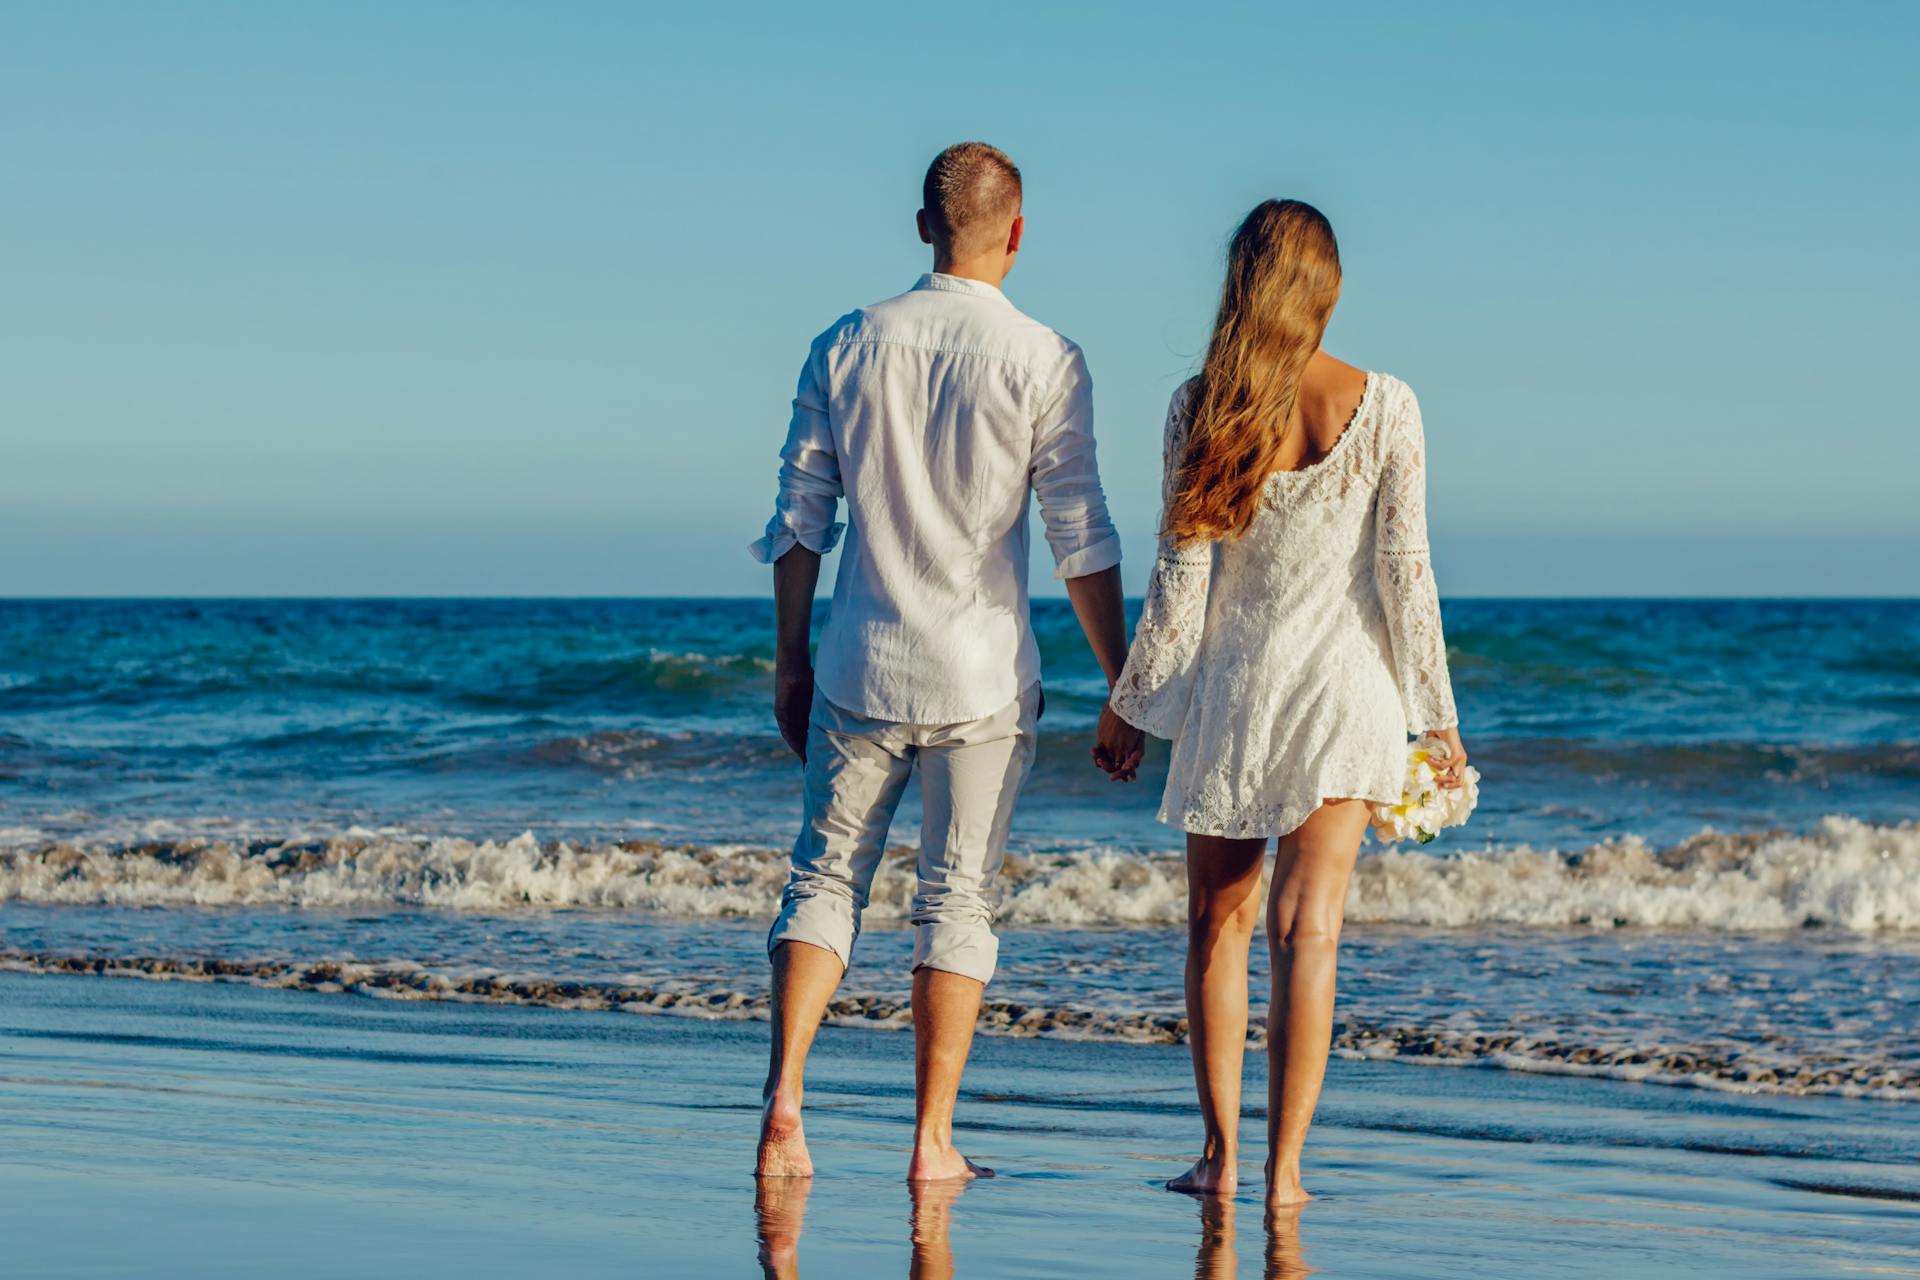 A couple walking on the beach | Source: Pexels